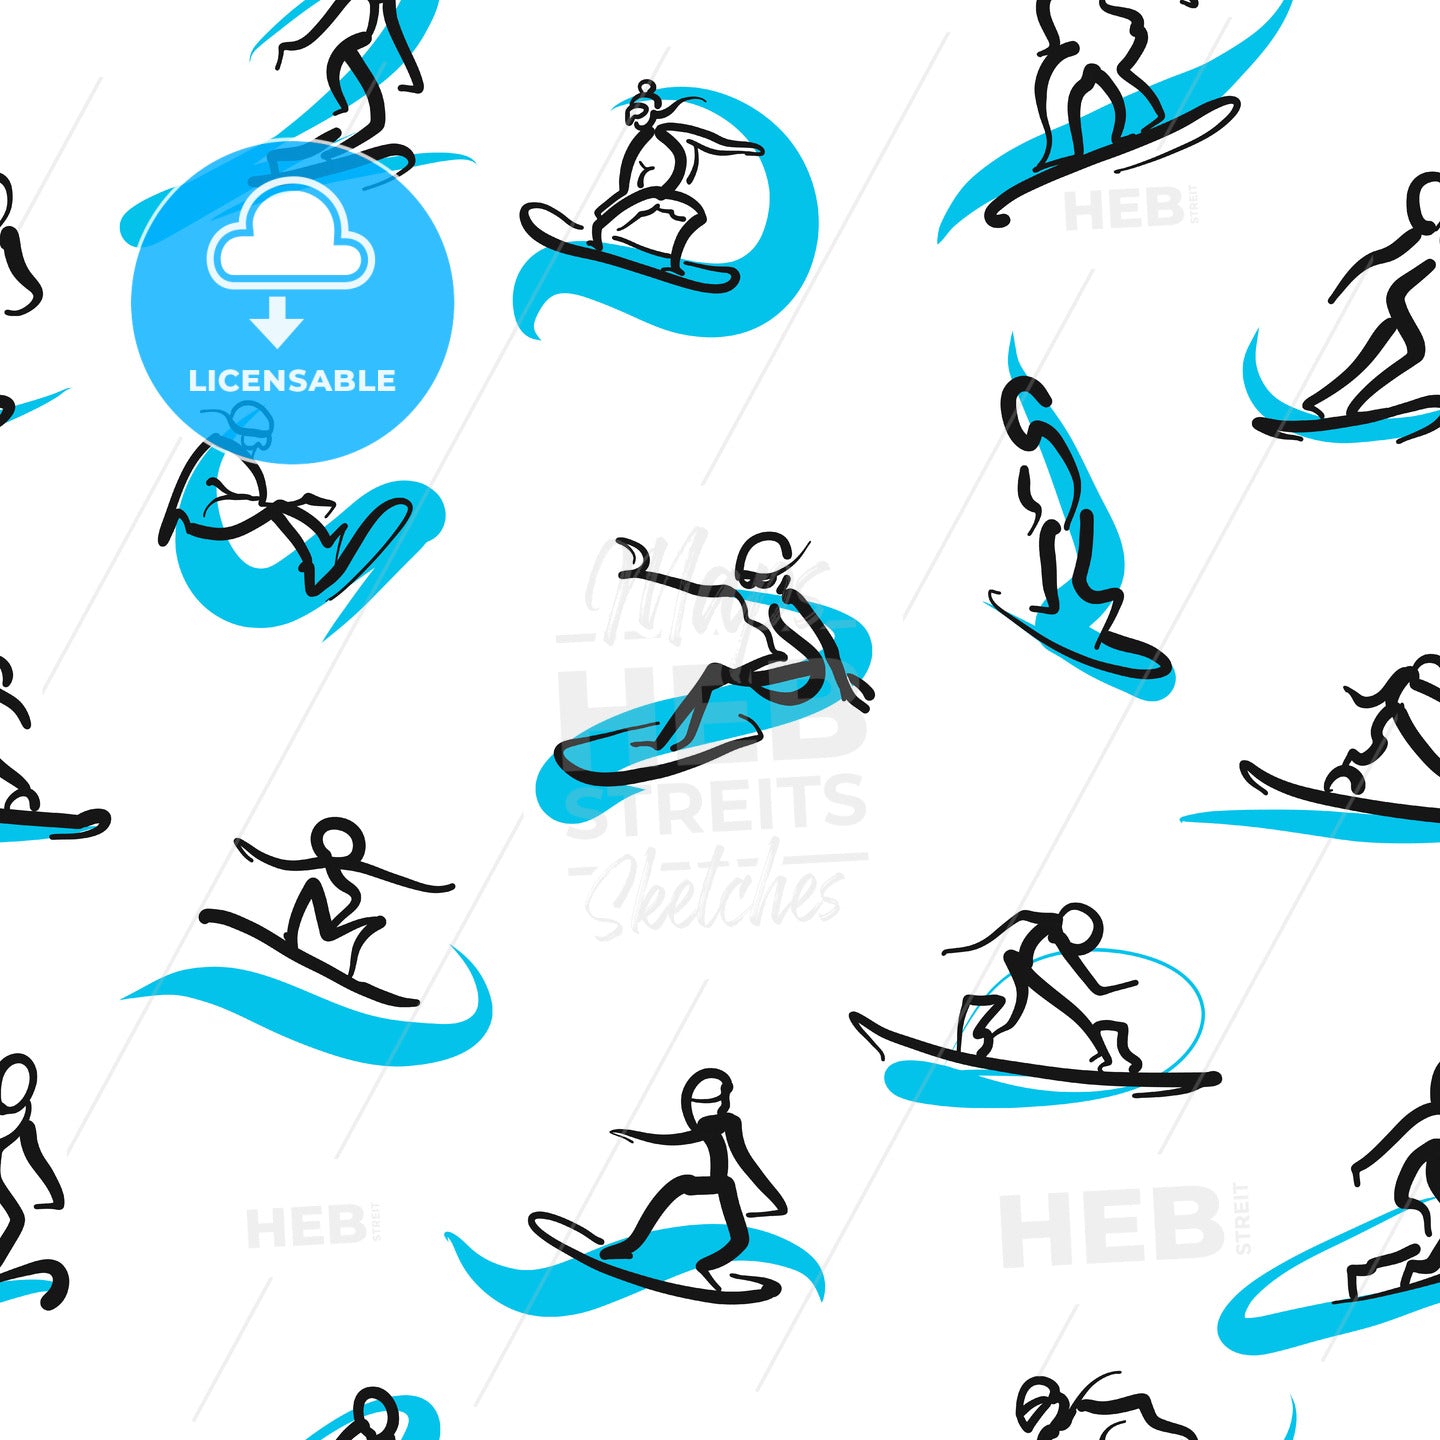 Hand drawn snowboarder icons, seamless pattern – instant download